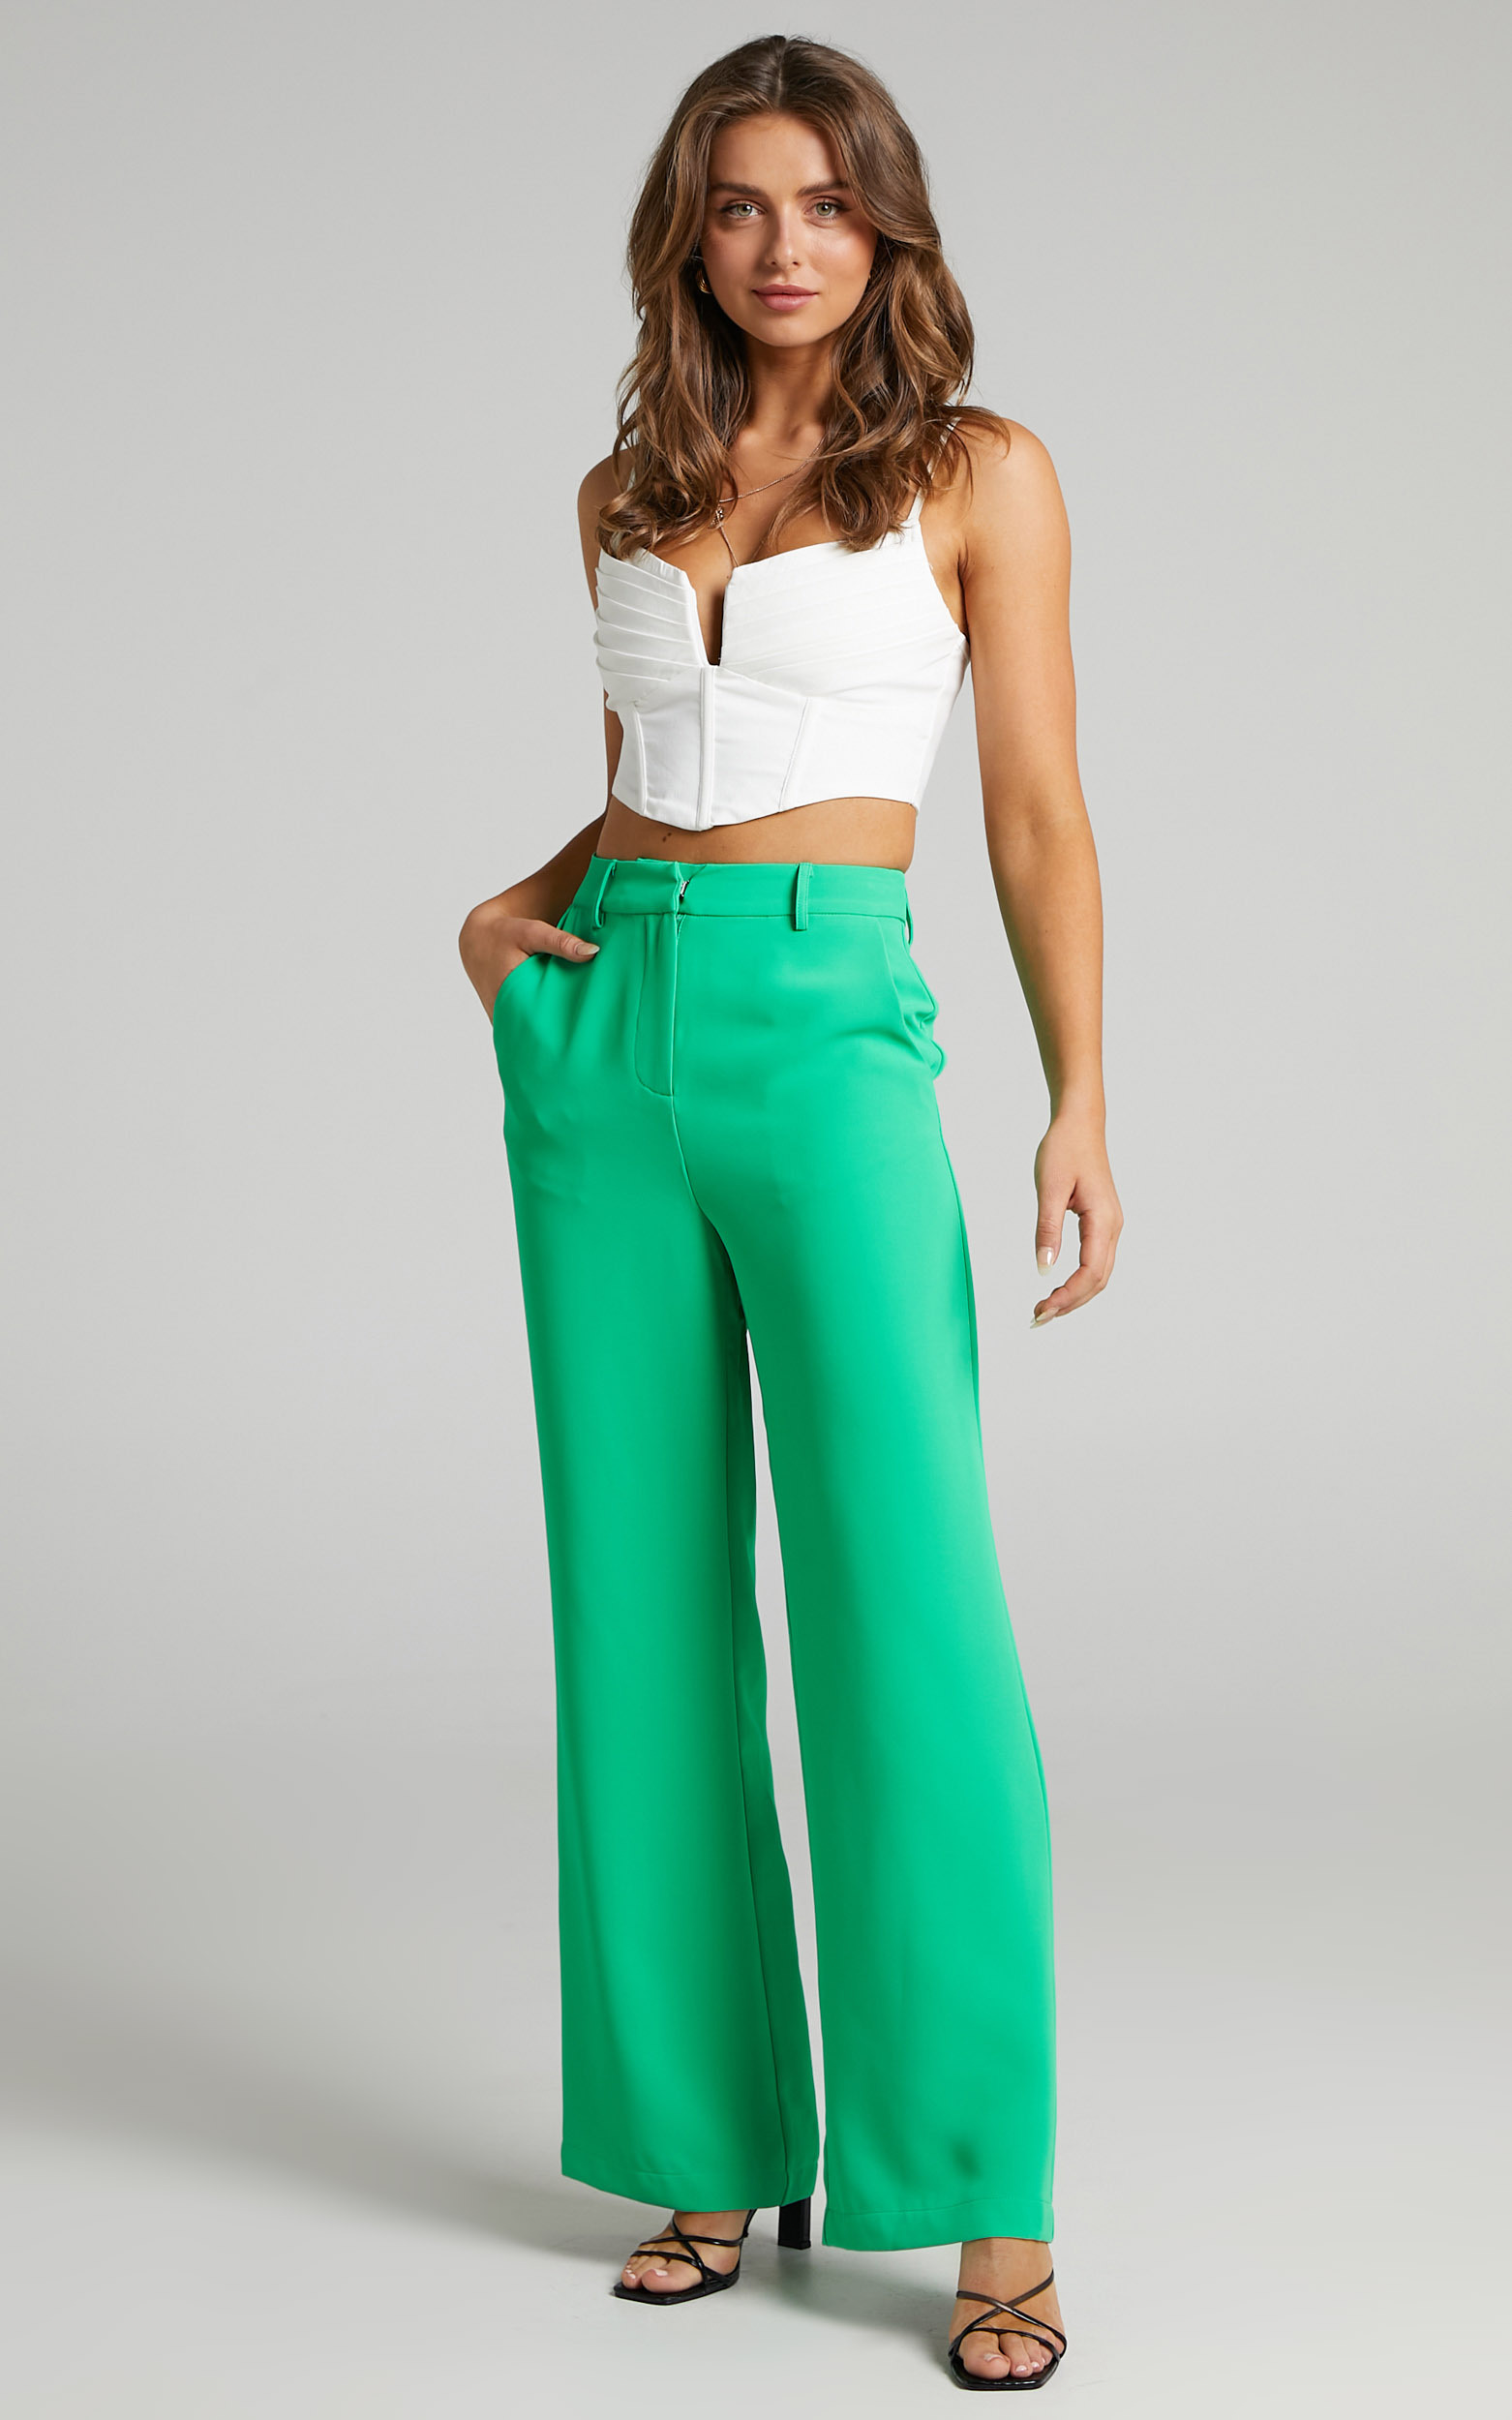 Bonnie Tailored Wide Leg Pants in Green - 06, GRN3, hi-res image number null